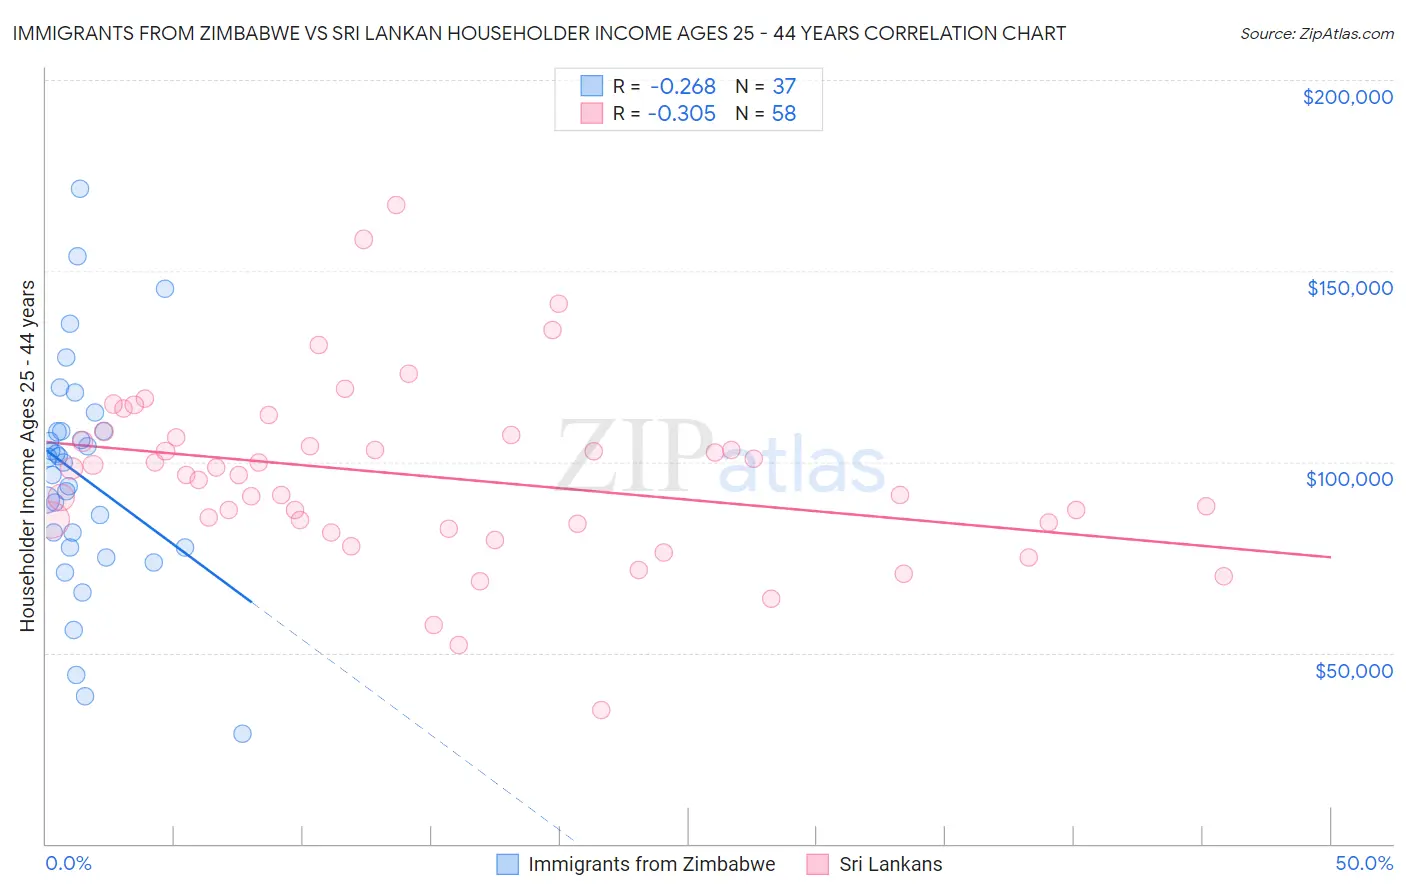 Immigrants from Zimbabwe vs Sri Lankan Householder Income Ages 25 - 44 years